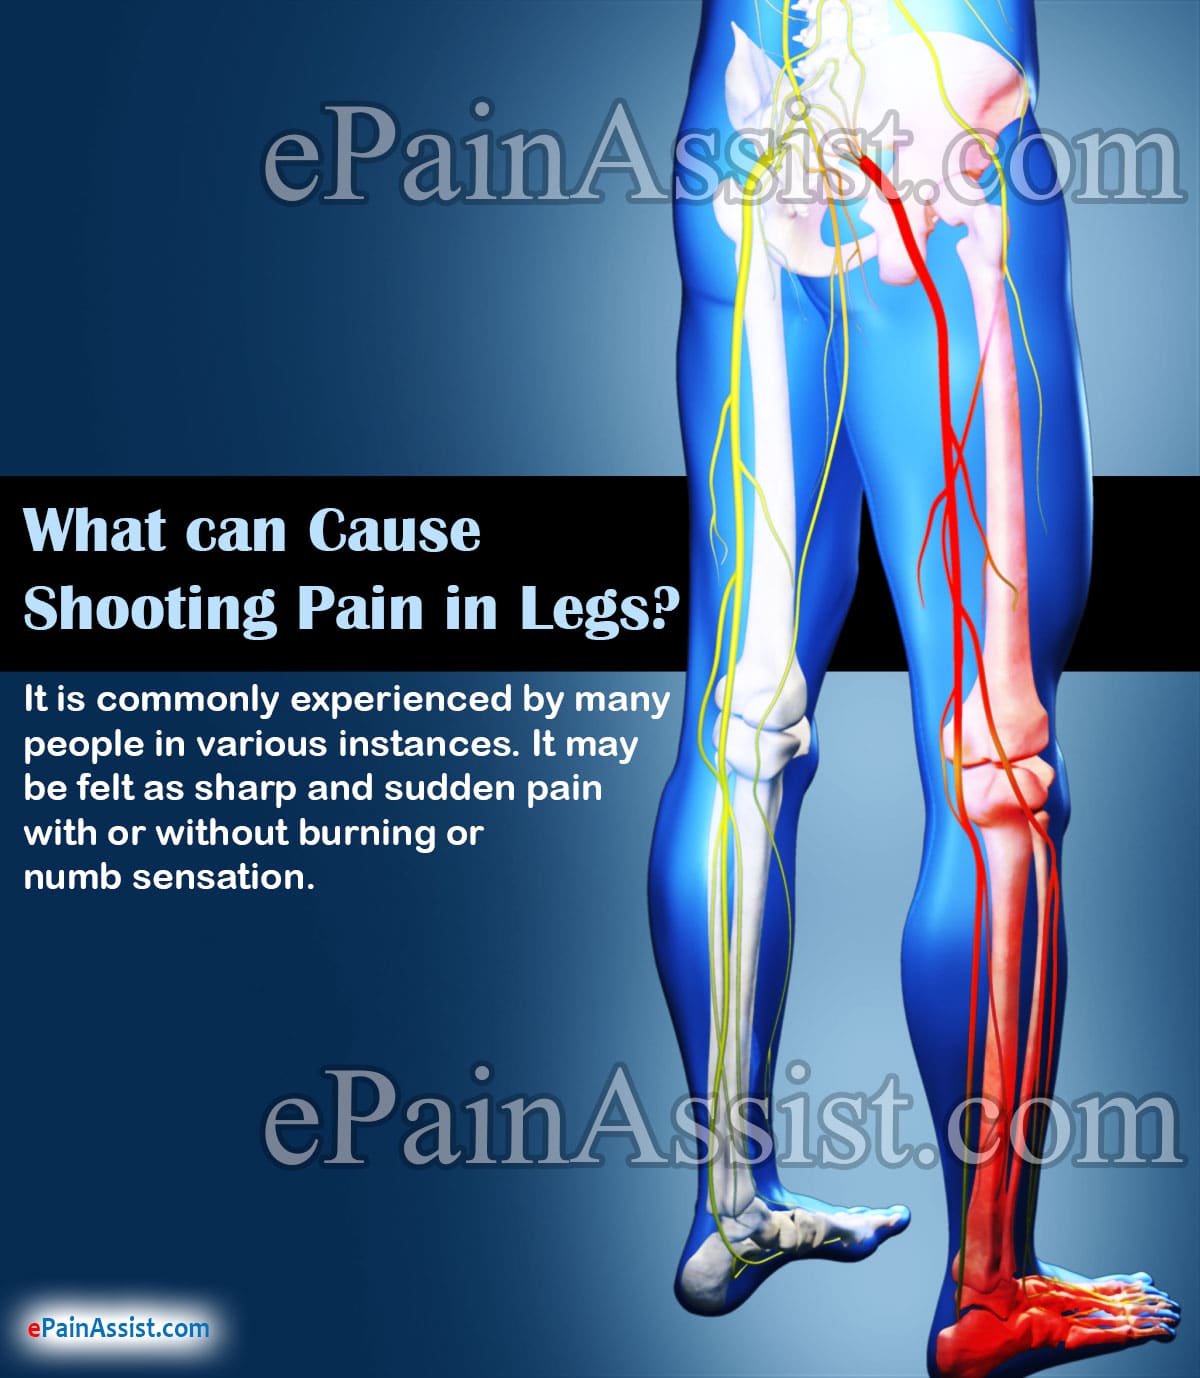 What can Cause Shooting Pain in Legs?